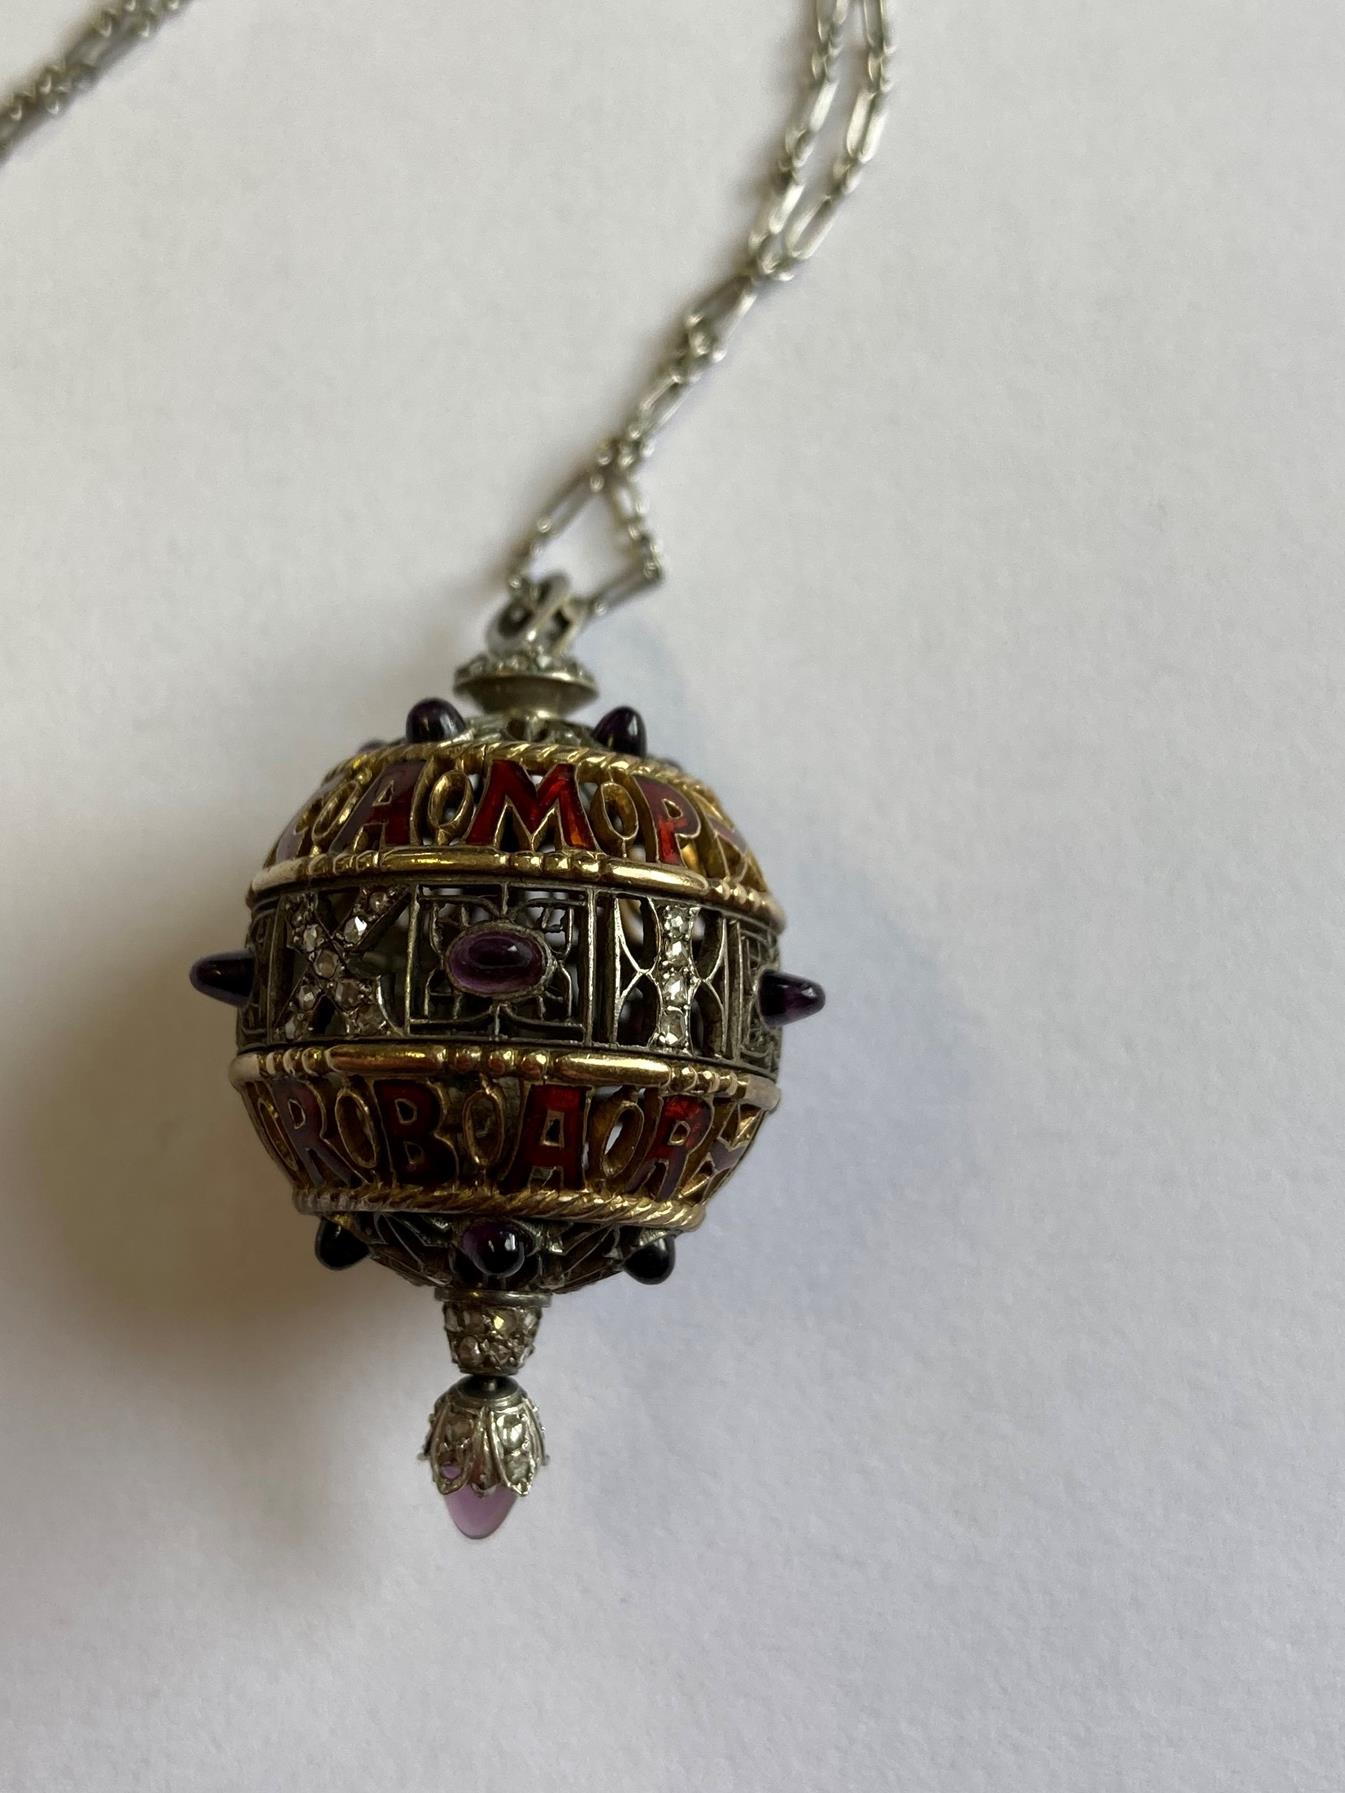 An Amethyst, Diamond and Enamel Pendant on Chain, 1911, the openwork ball with red enamel - Image 5 of 8